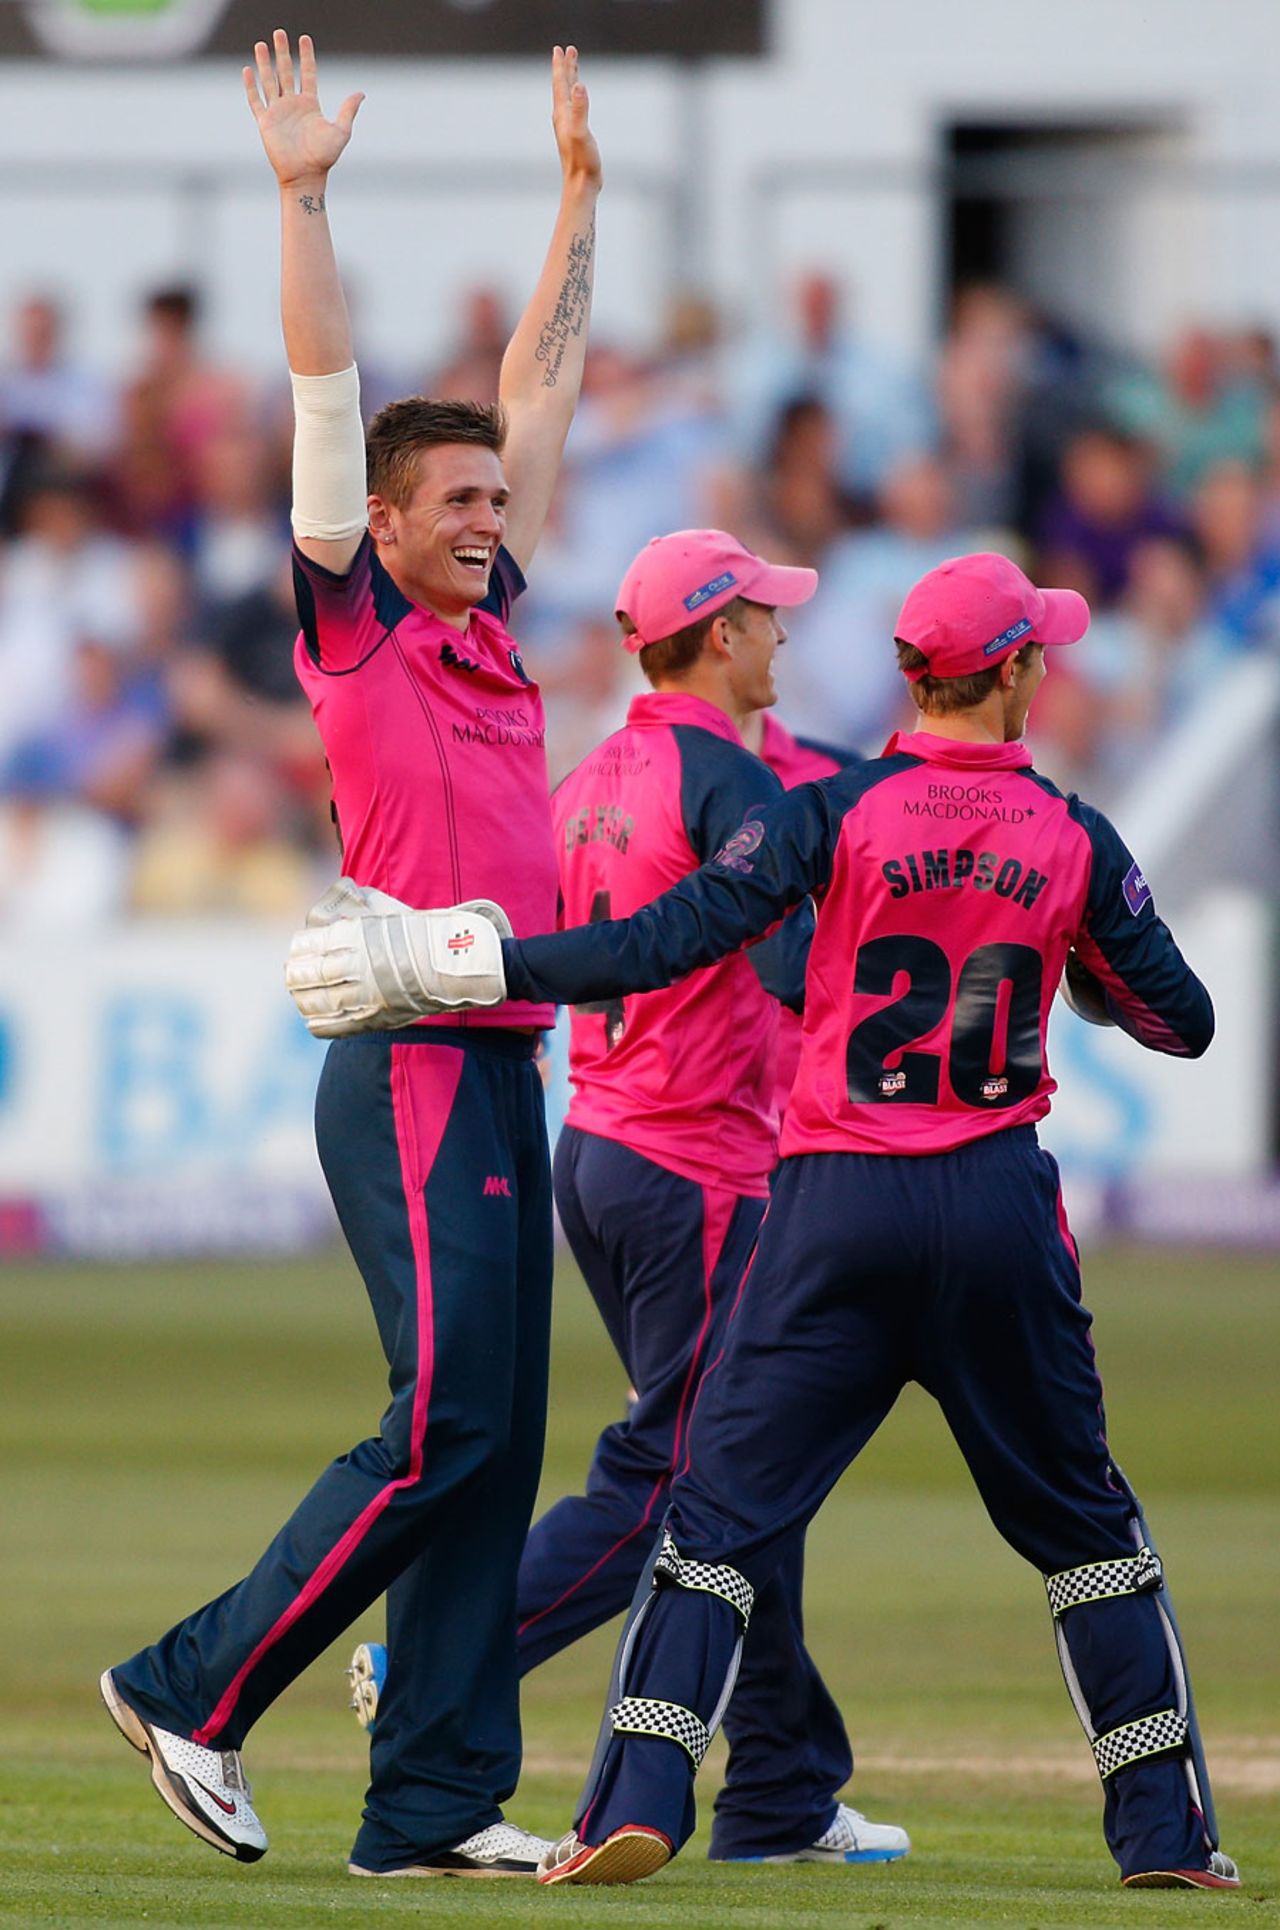 Harry Podmore took 2 for 20 on debut, Essex v Middlesex, NatWest T20 Blast, Chelmsford, June 20, 2014